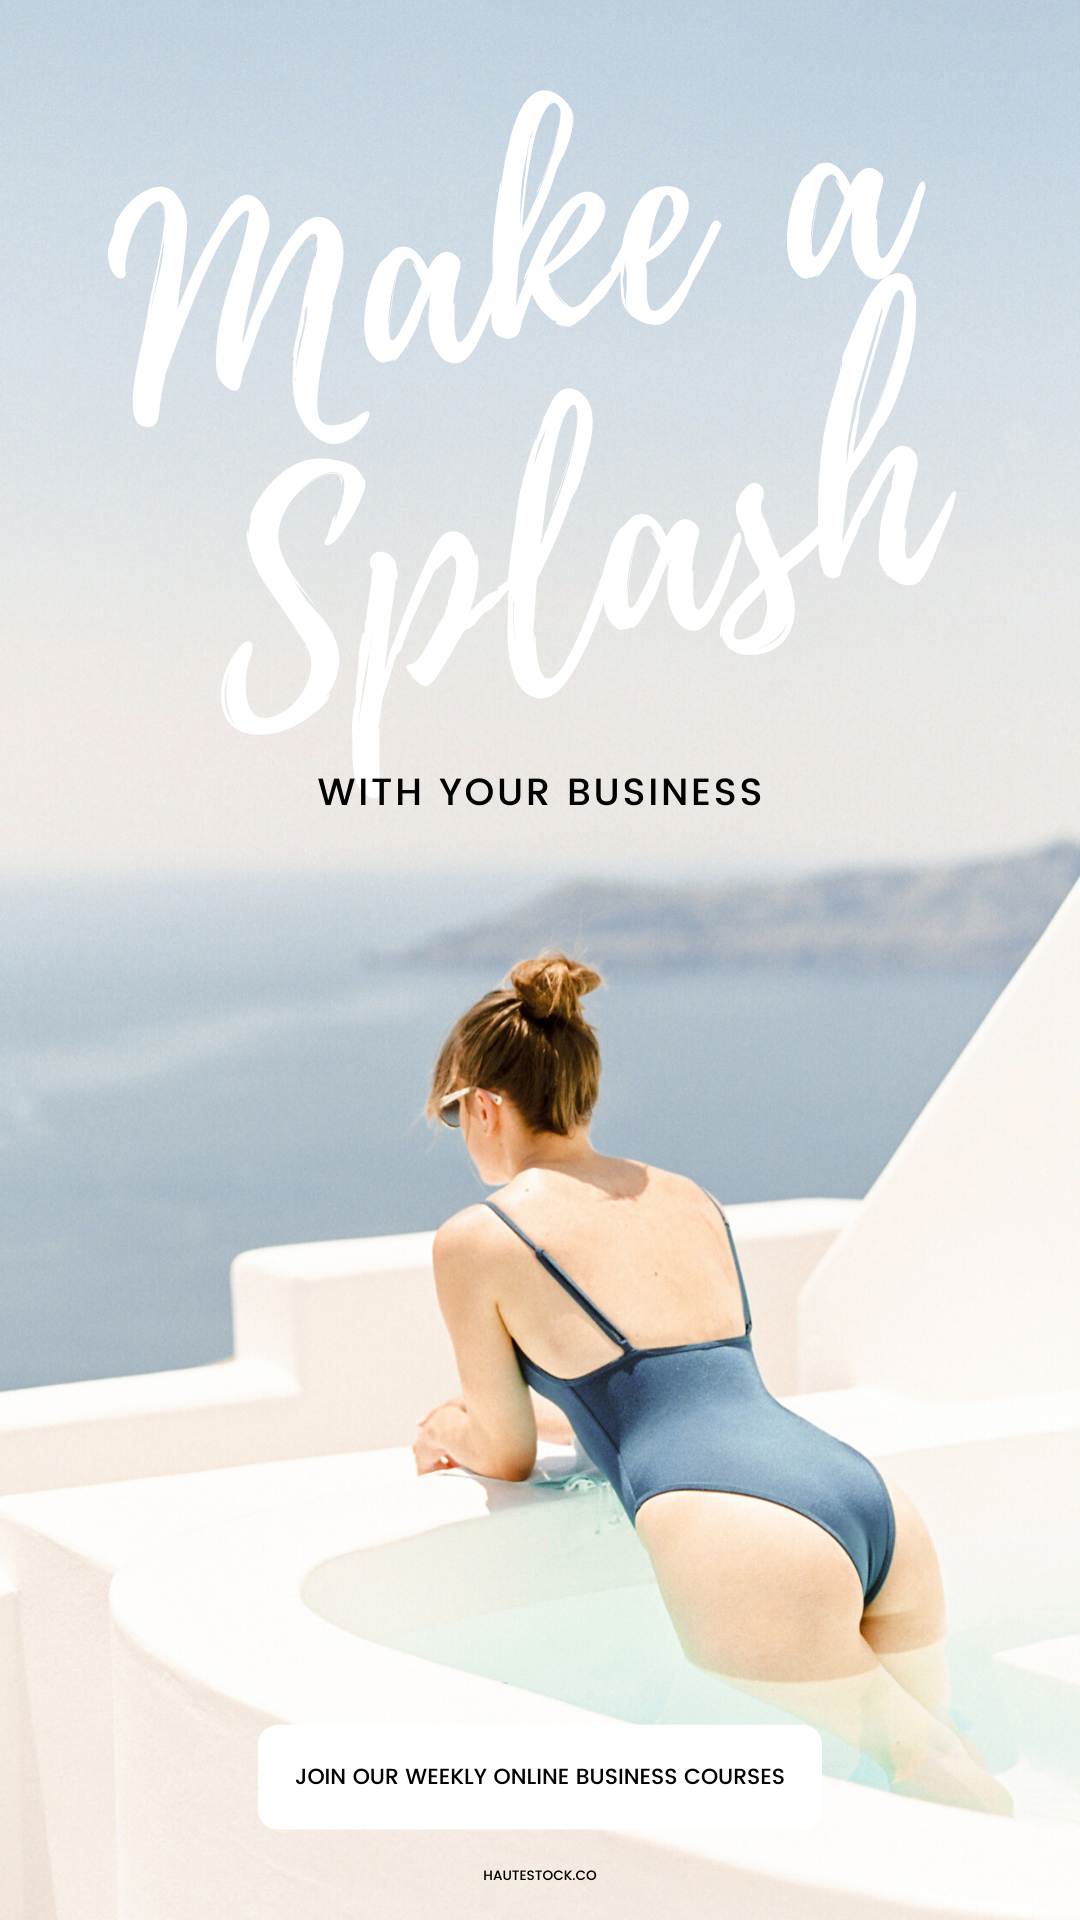 How to use summer styled stock photography for your business' promotional graphics using Haute Stock photography.